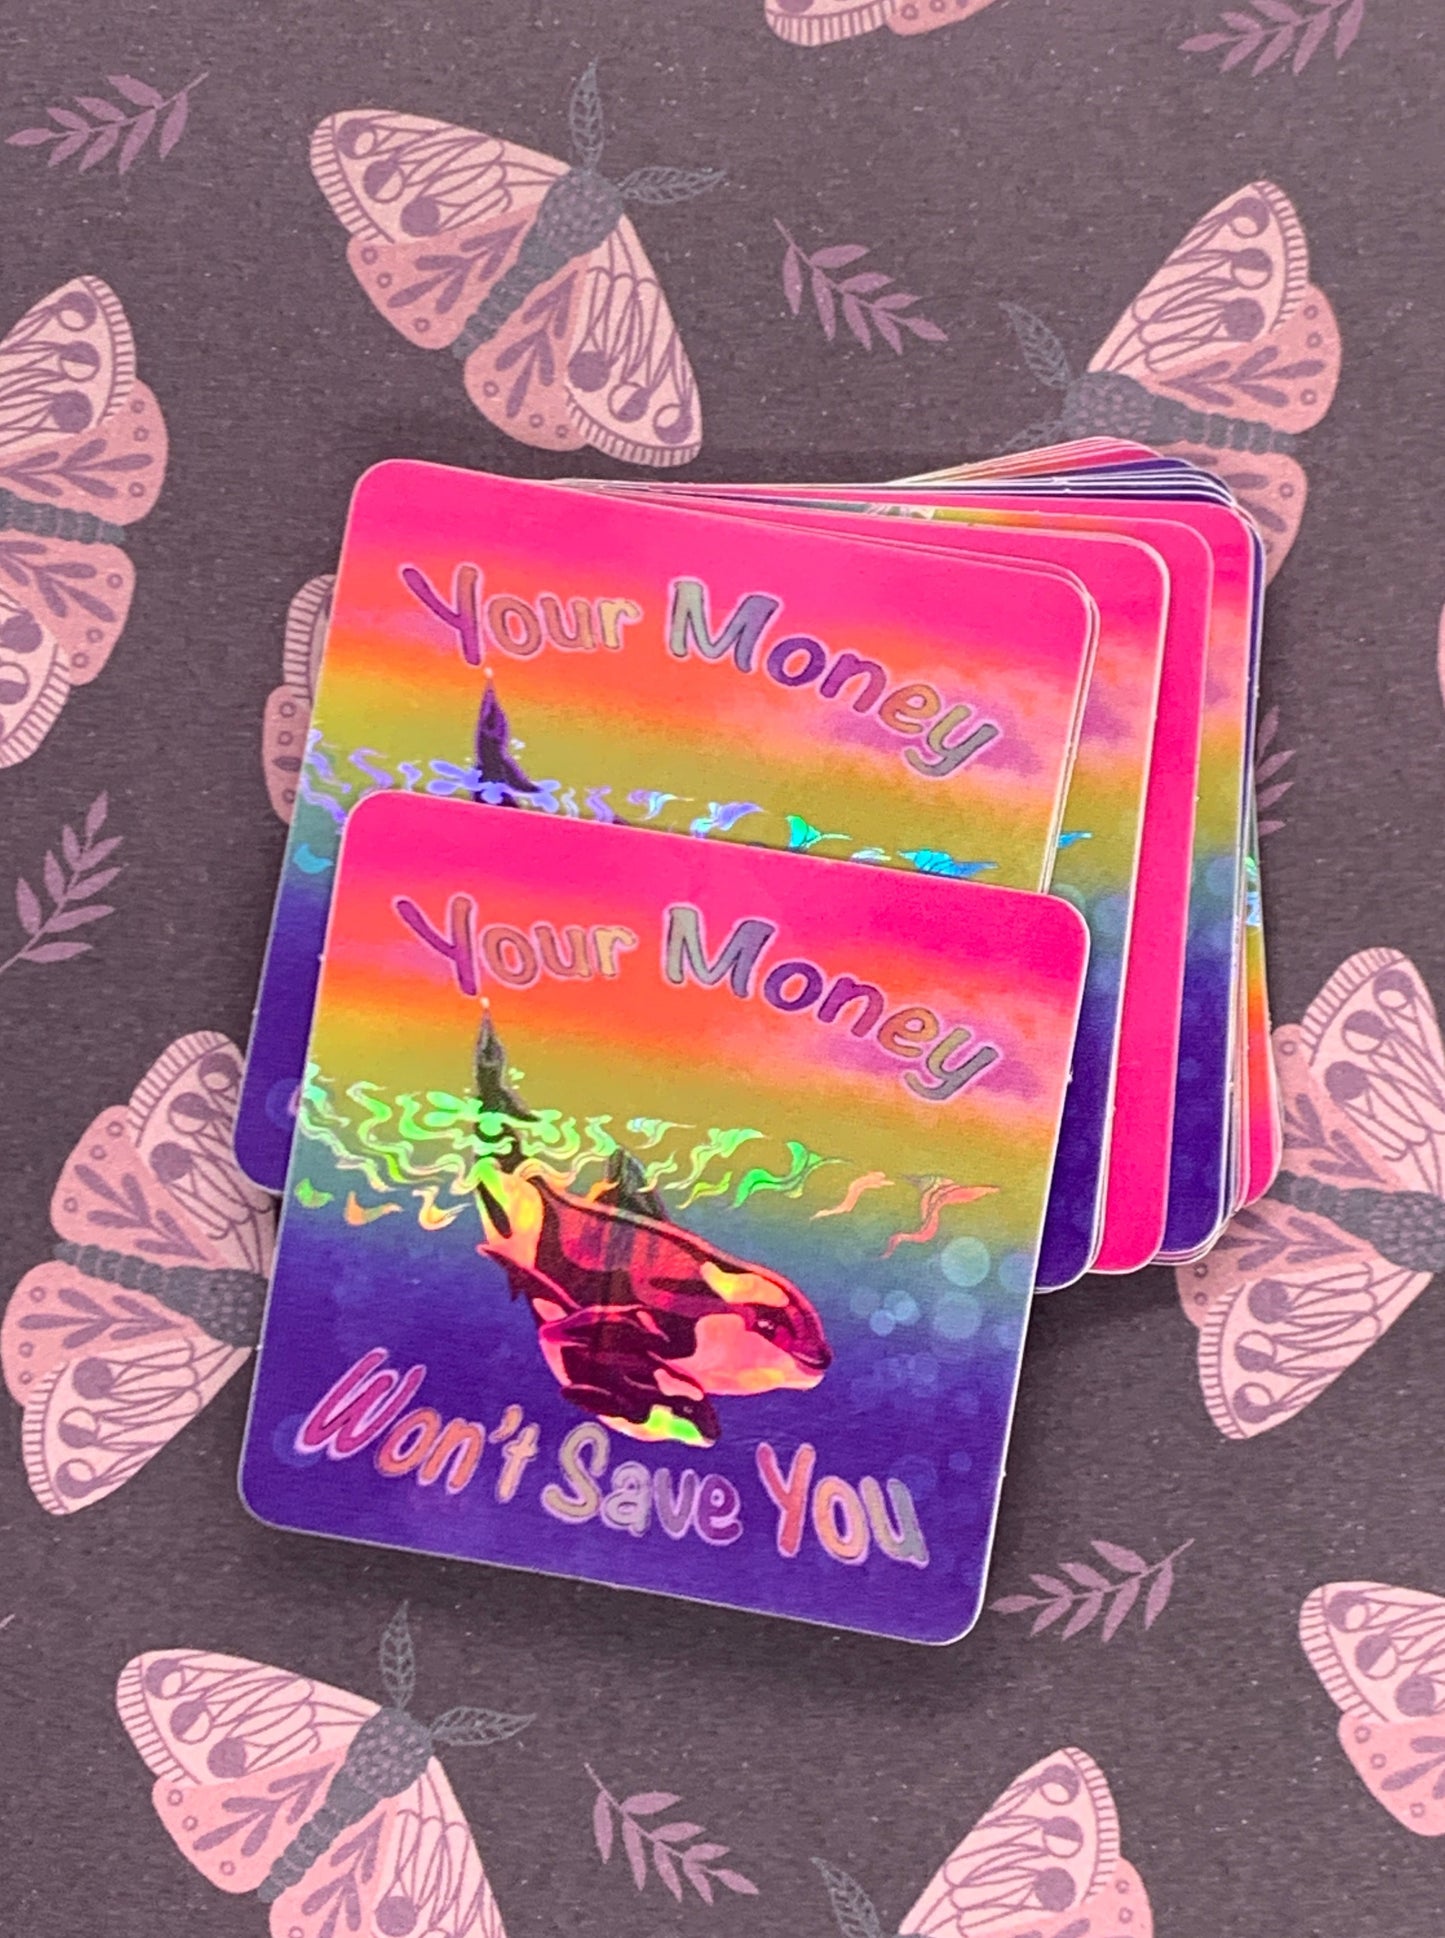 Your Money Won't Save You Holographic Sticker